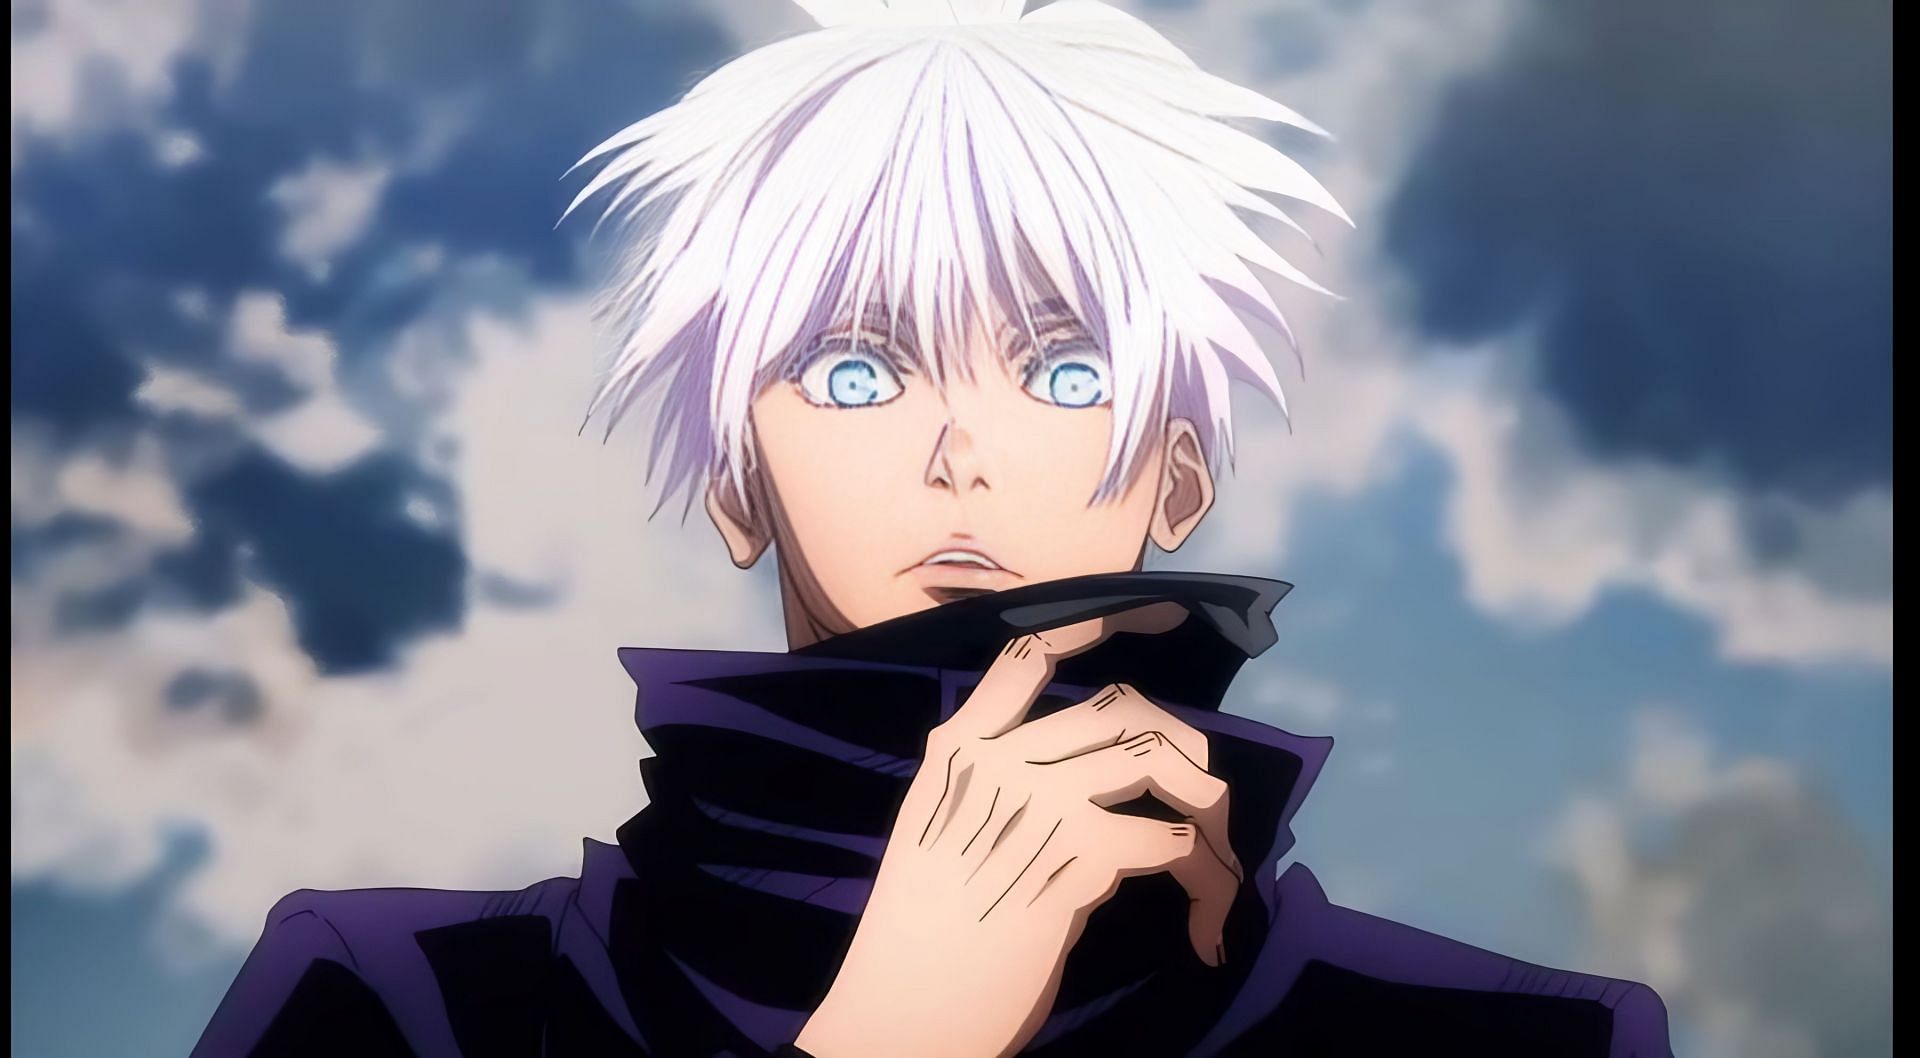 Does the Hunter X Hunter anime and manga stop at the same place? - Quora